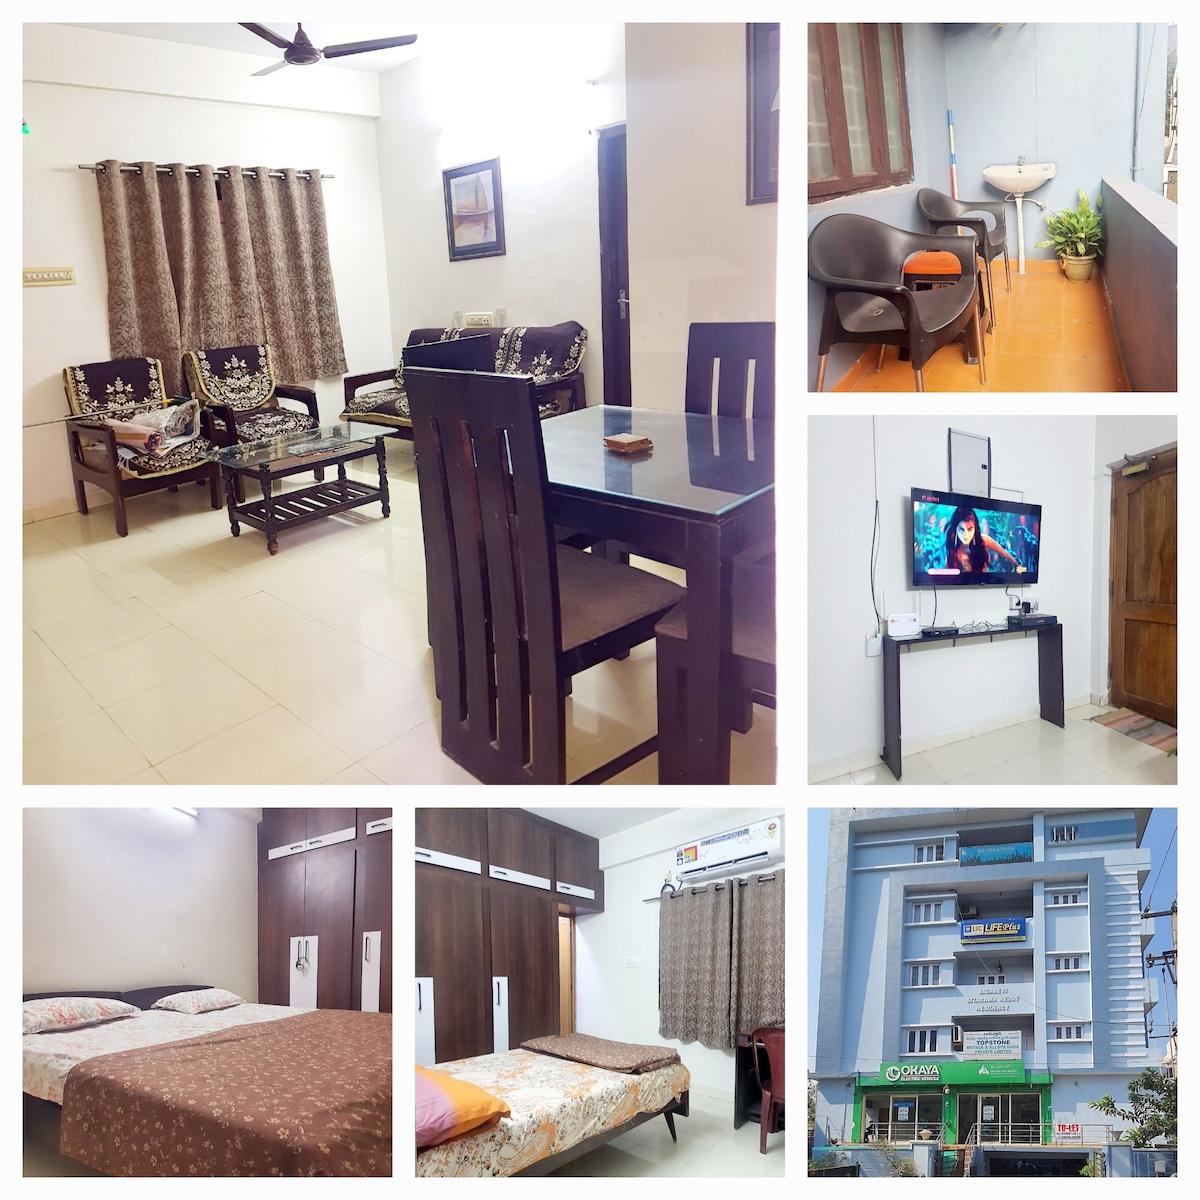 Flat in Vizag, 3 Ac BHK 7 Guests, Car Parking